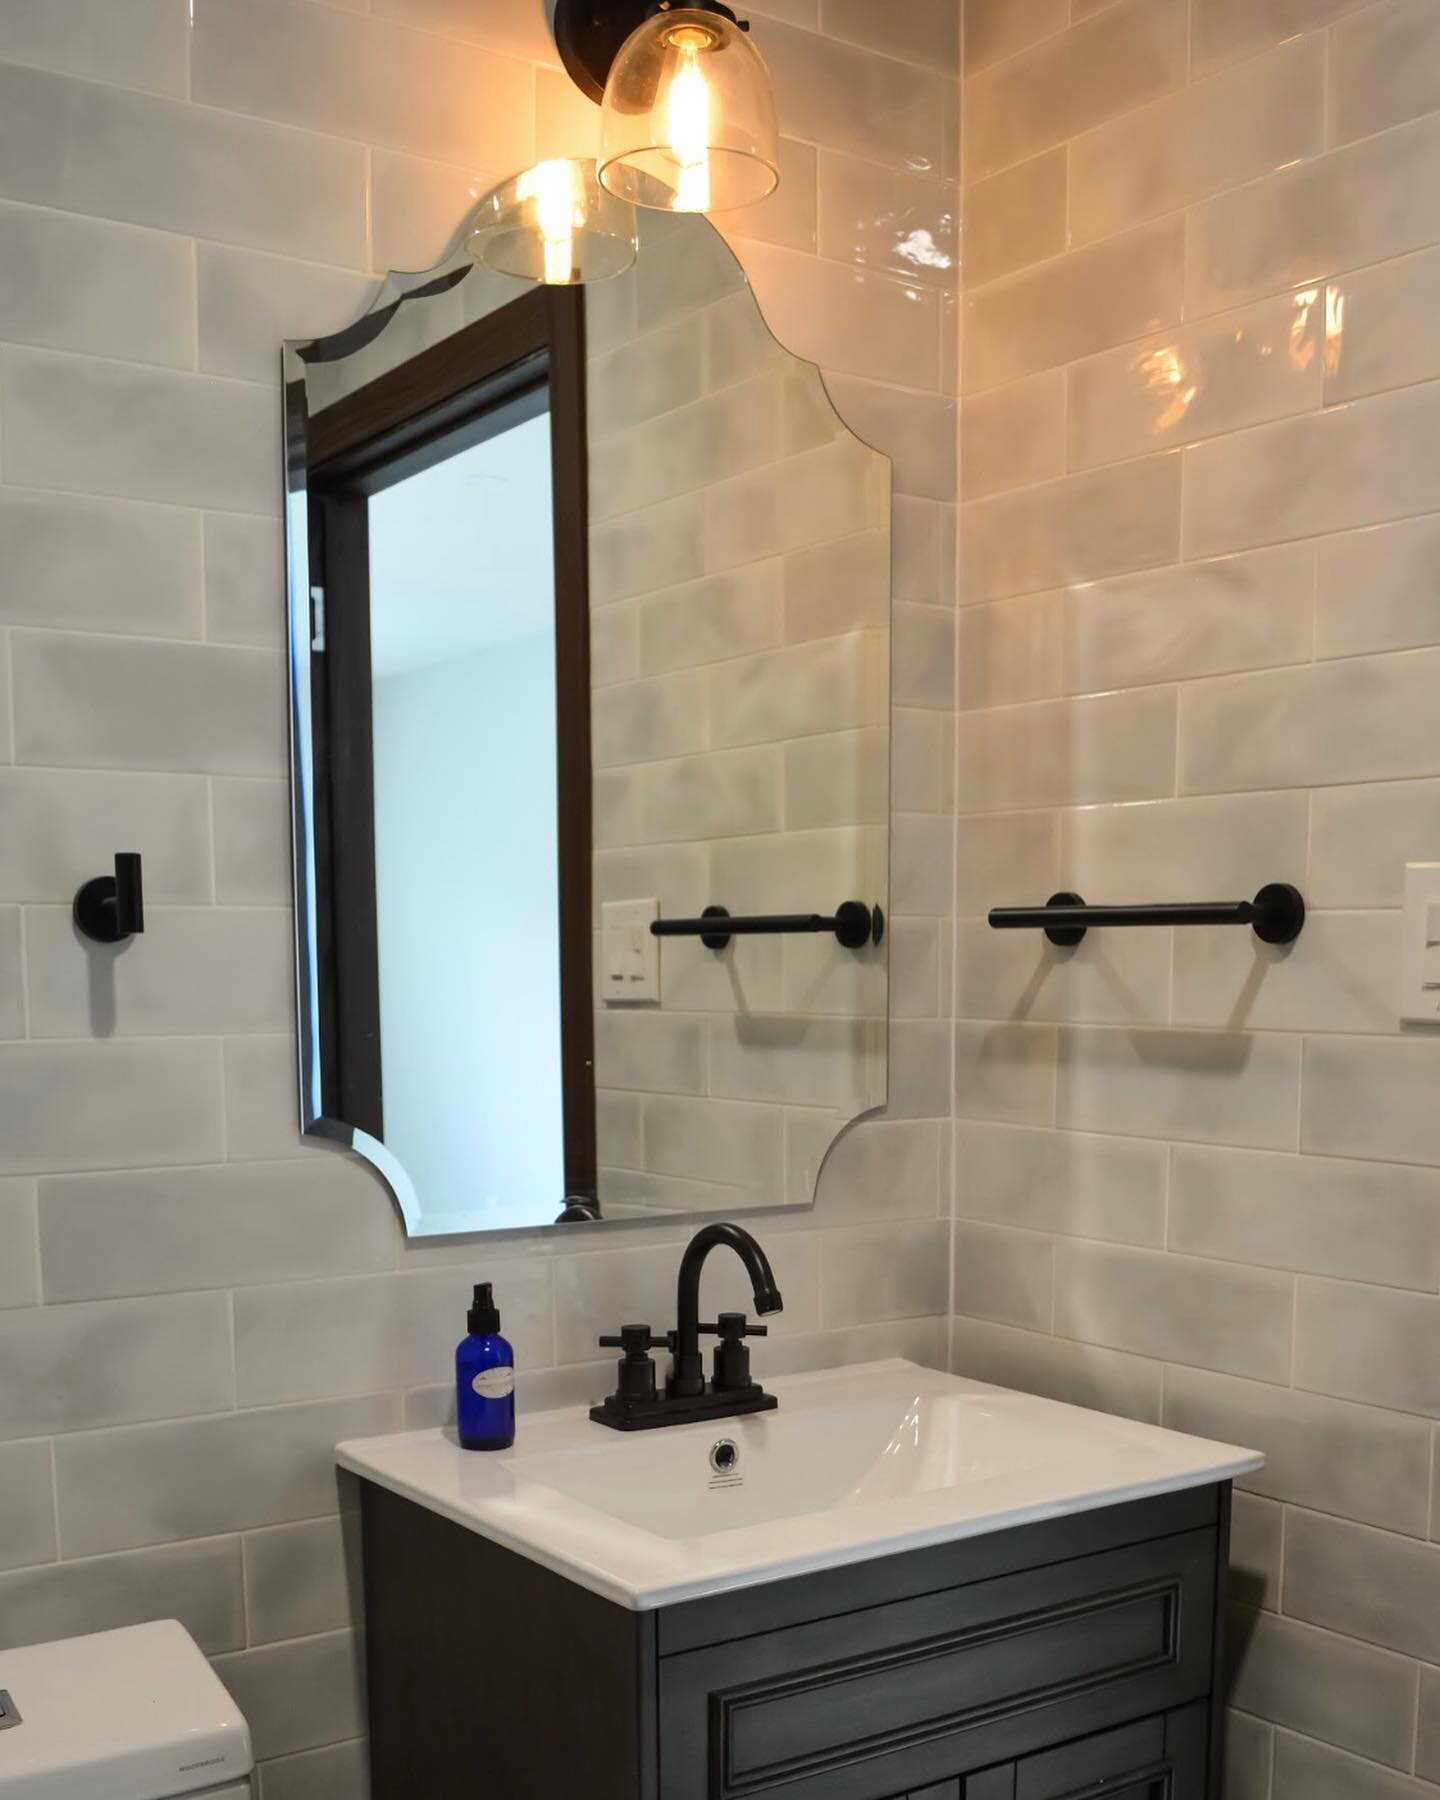 For the powder room all new tile, fixtures, vanity, mirror and sconce. Again we see a color and texture variation in the tile for a hand made feel(but on a budget). The mirror complements the shape of the accent tiles in the downstairs bathrooms (nex